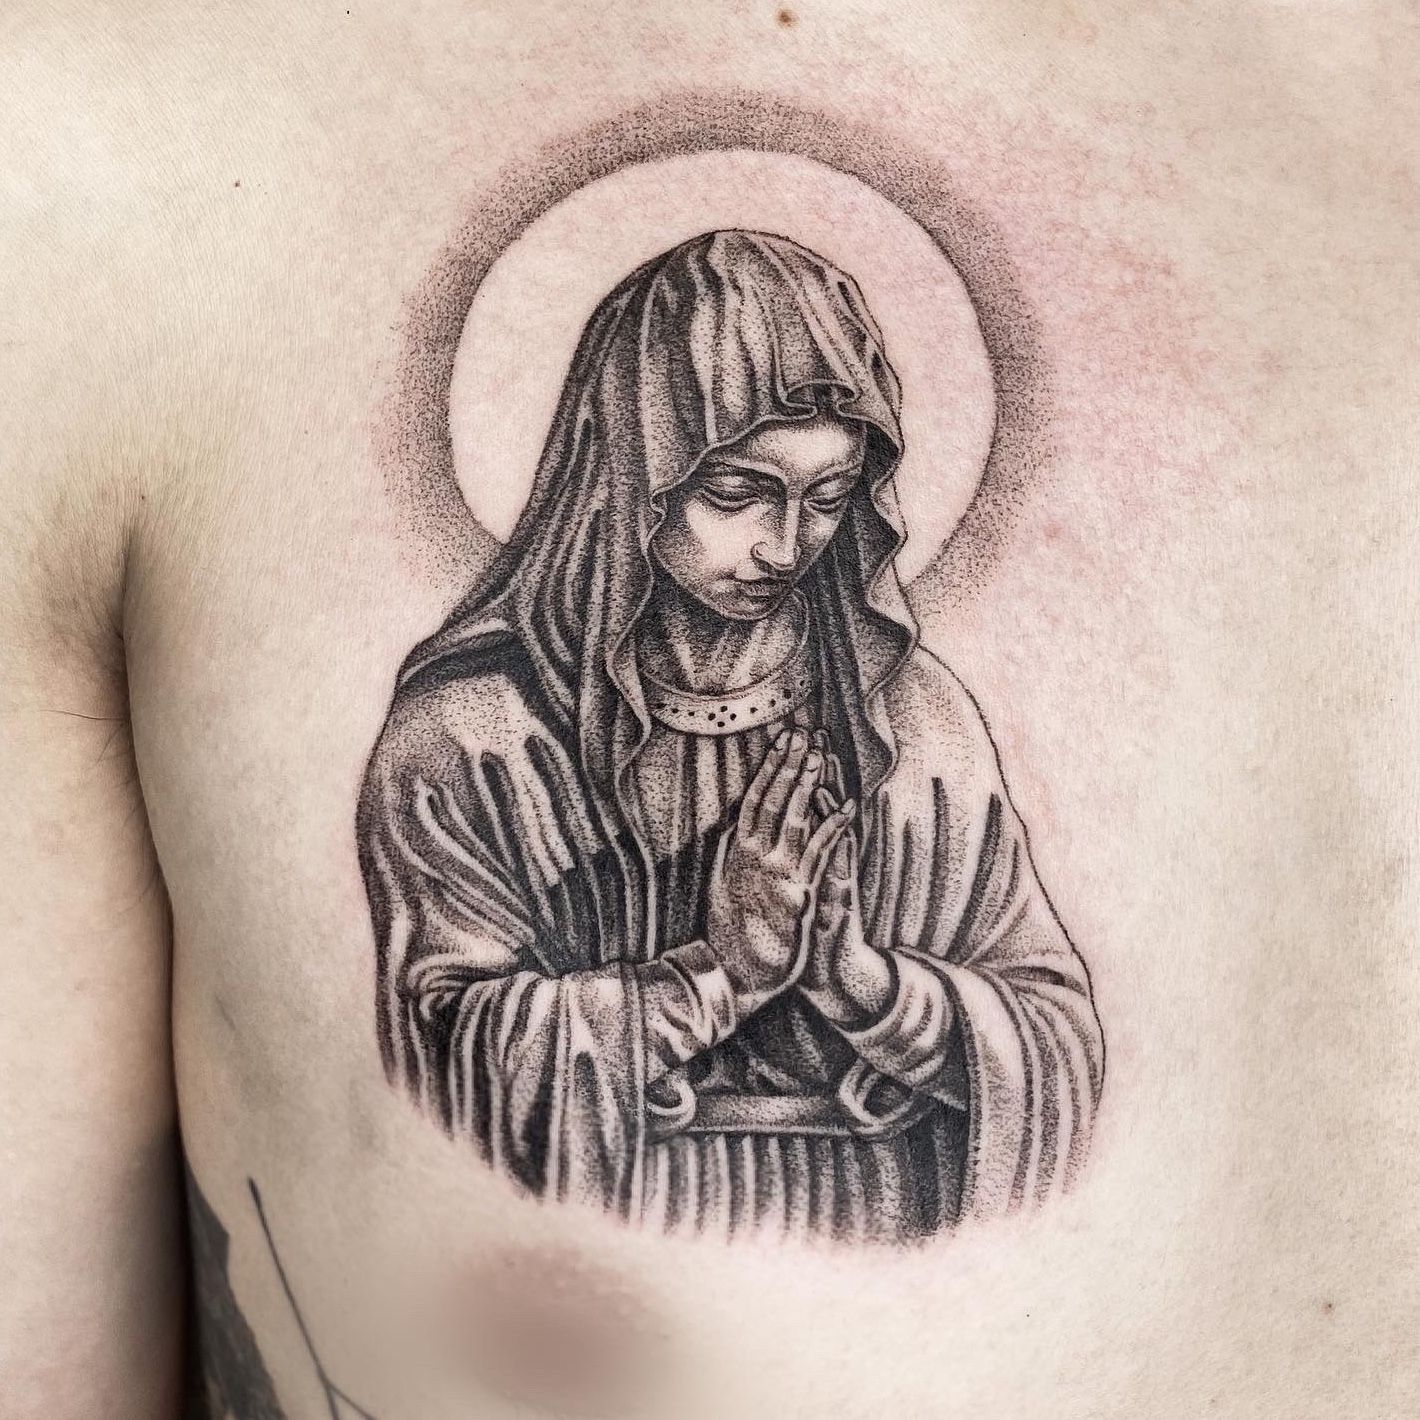 Selling Tattooed Skin Virgin Mary Tattoo on Mans Back Sells for 218000